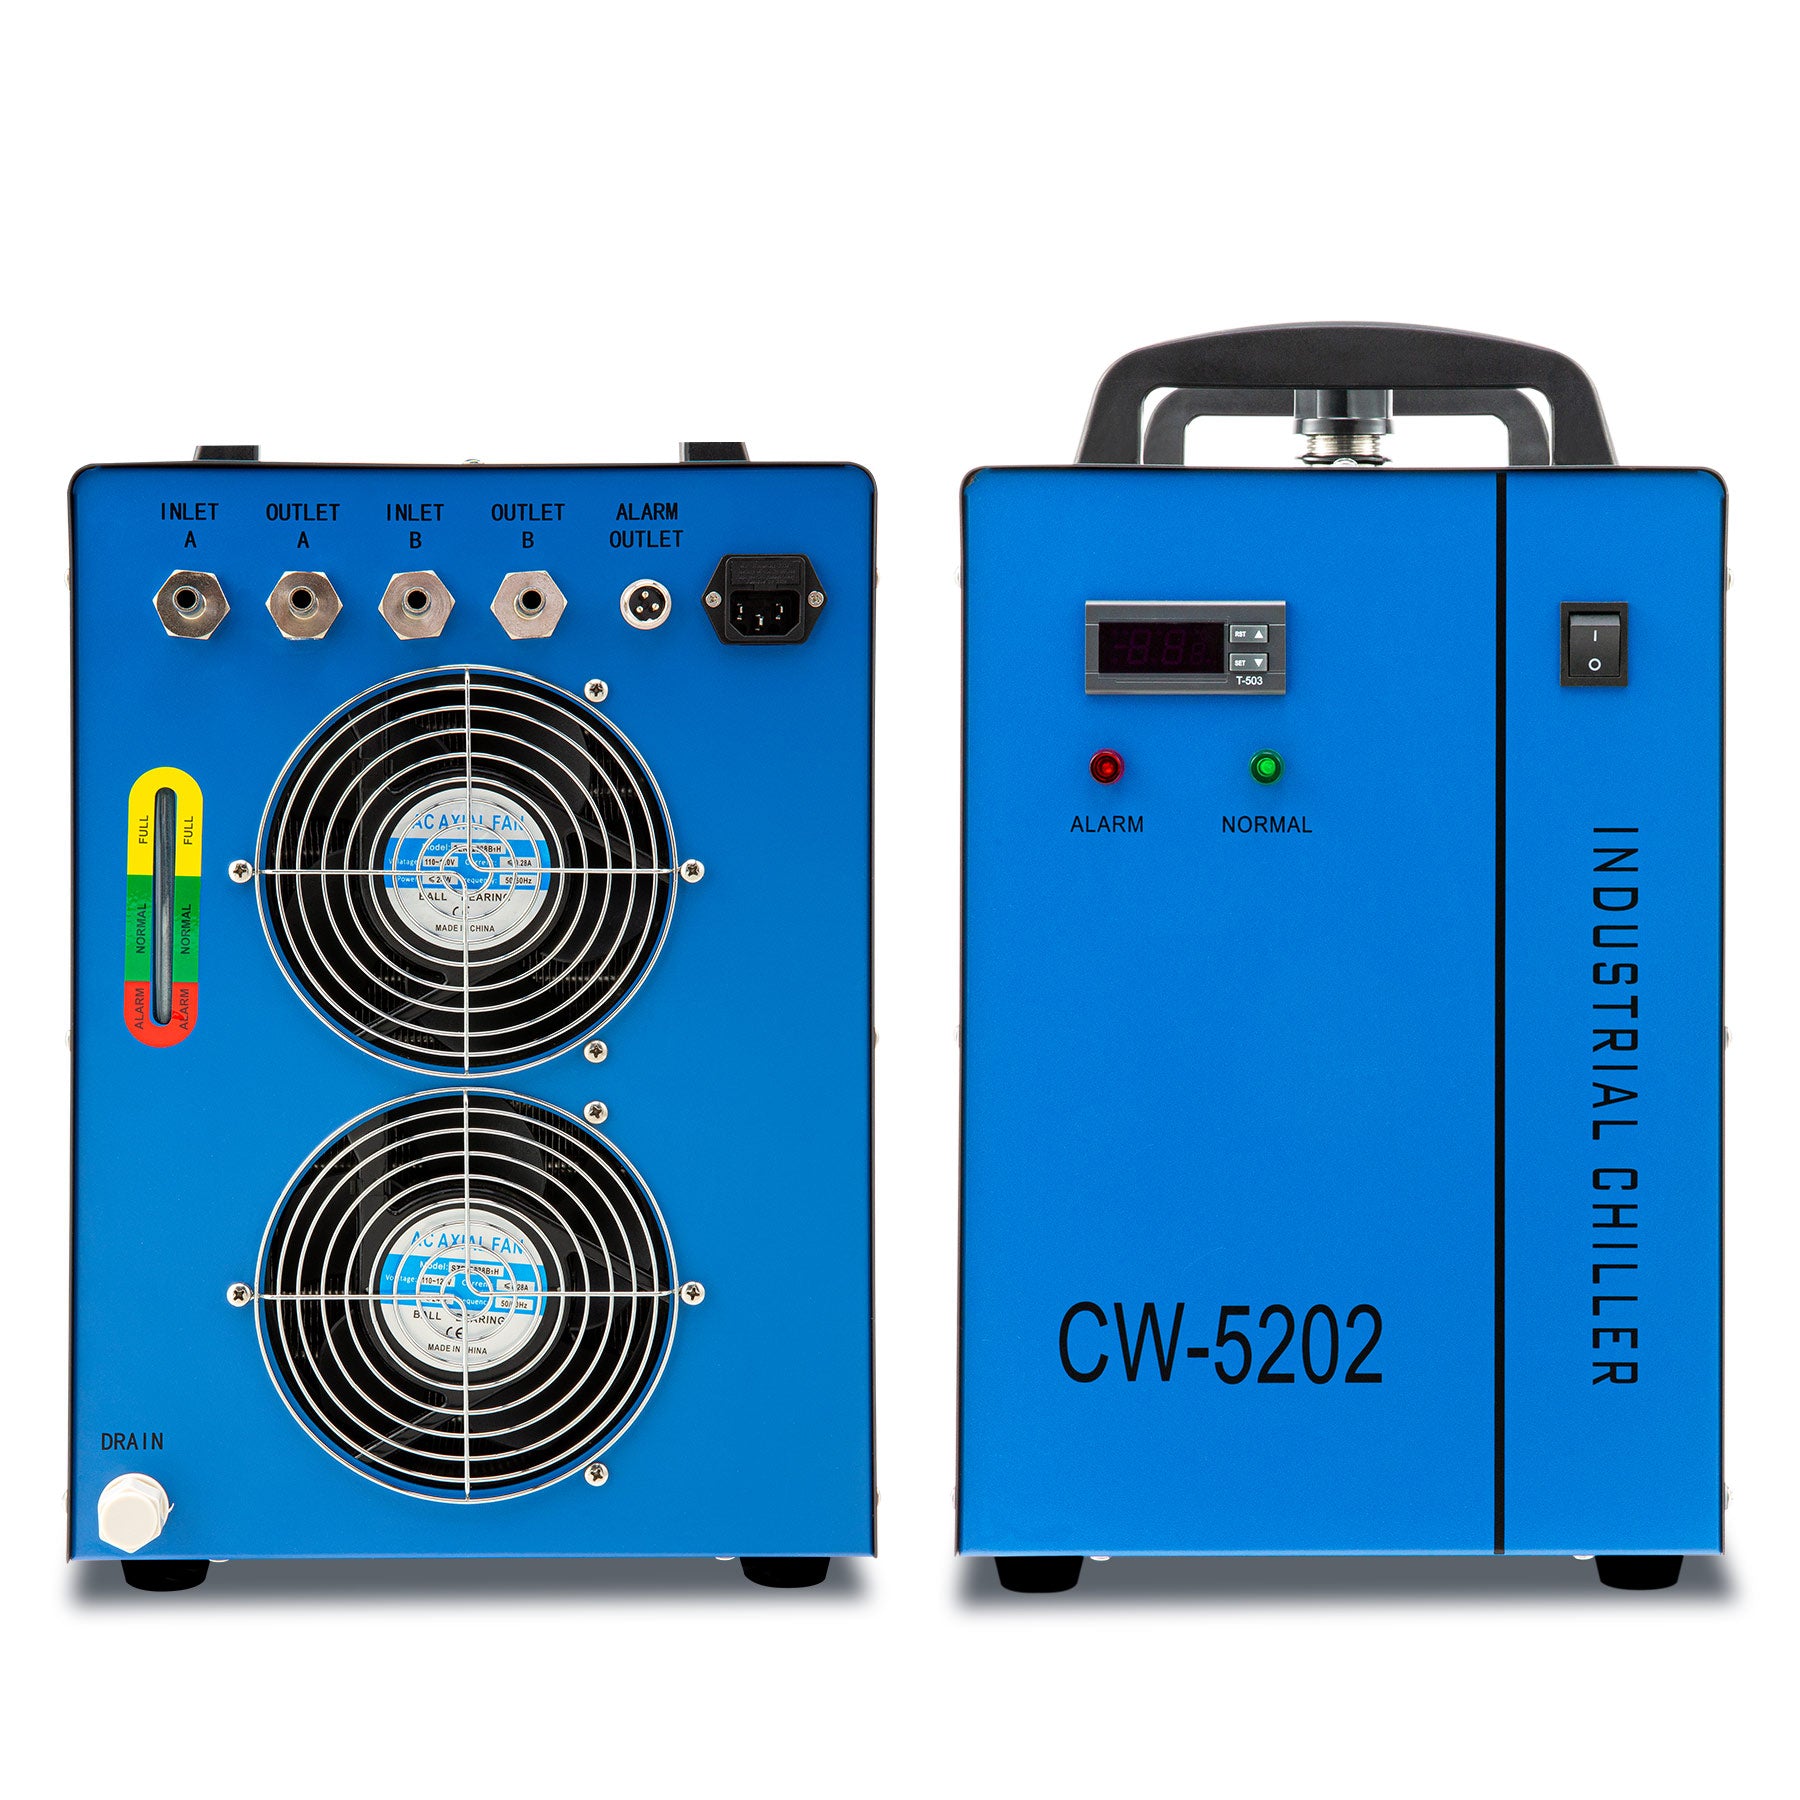 Industrial Water Chiller & Cooler for 50W-150W CO2 Laser Cutter | CW-5202